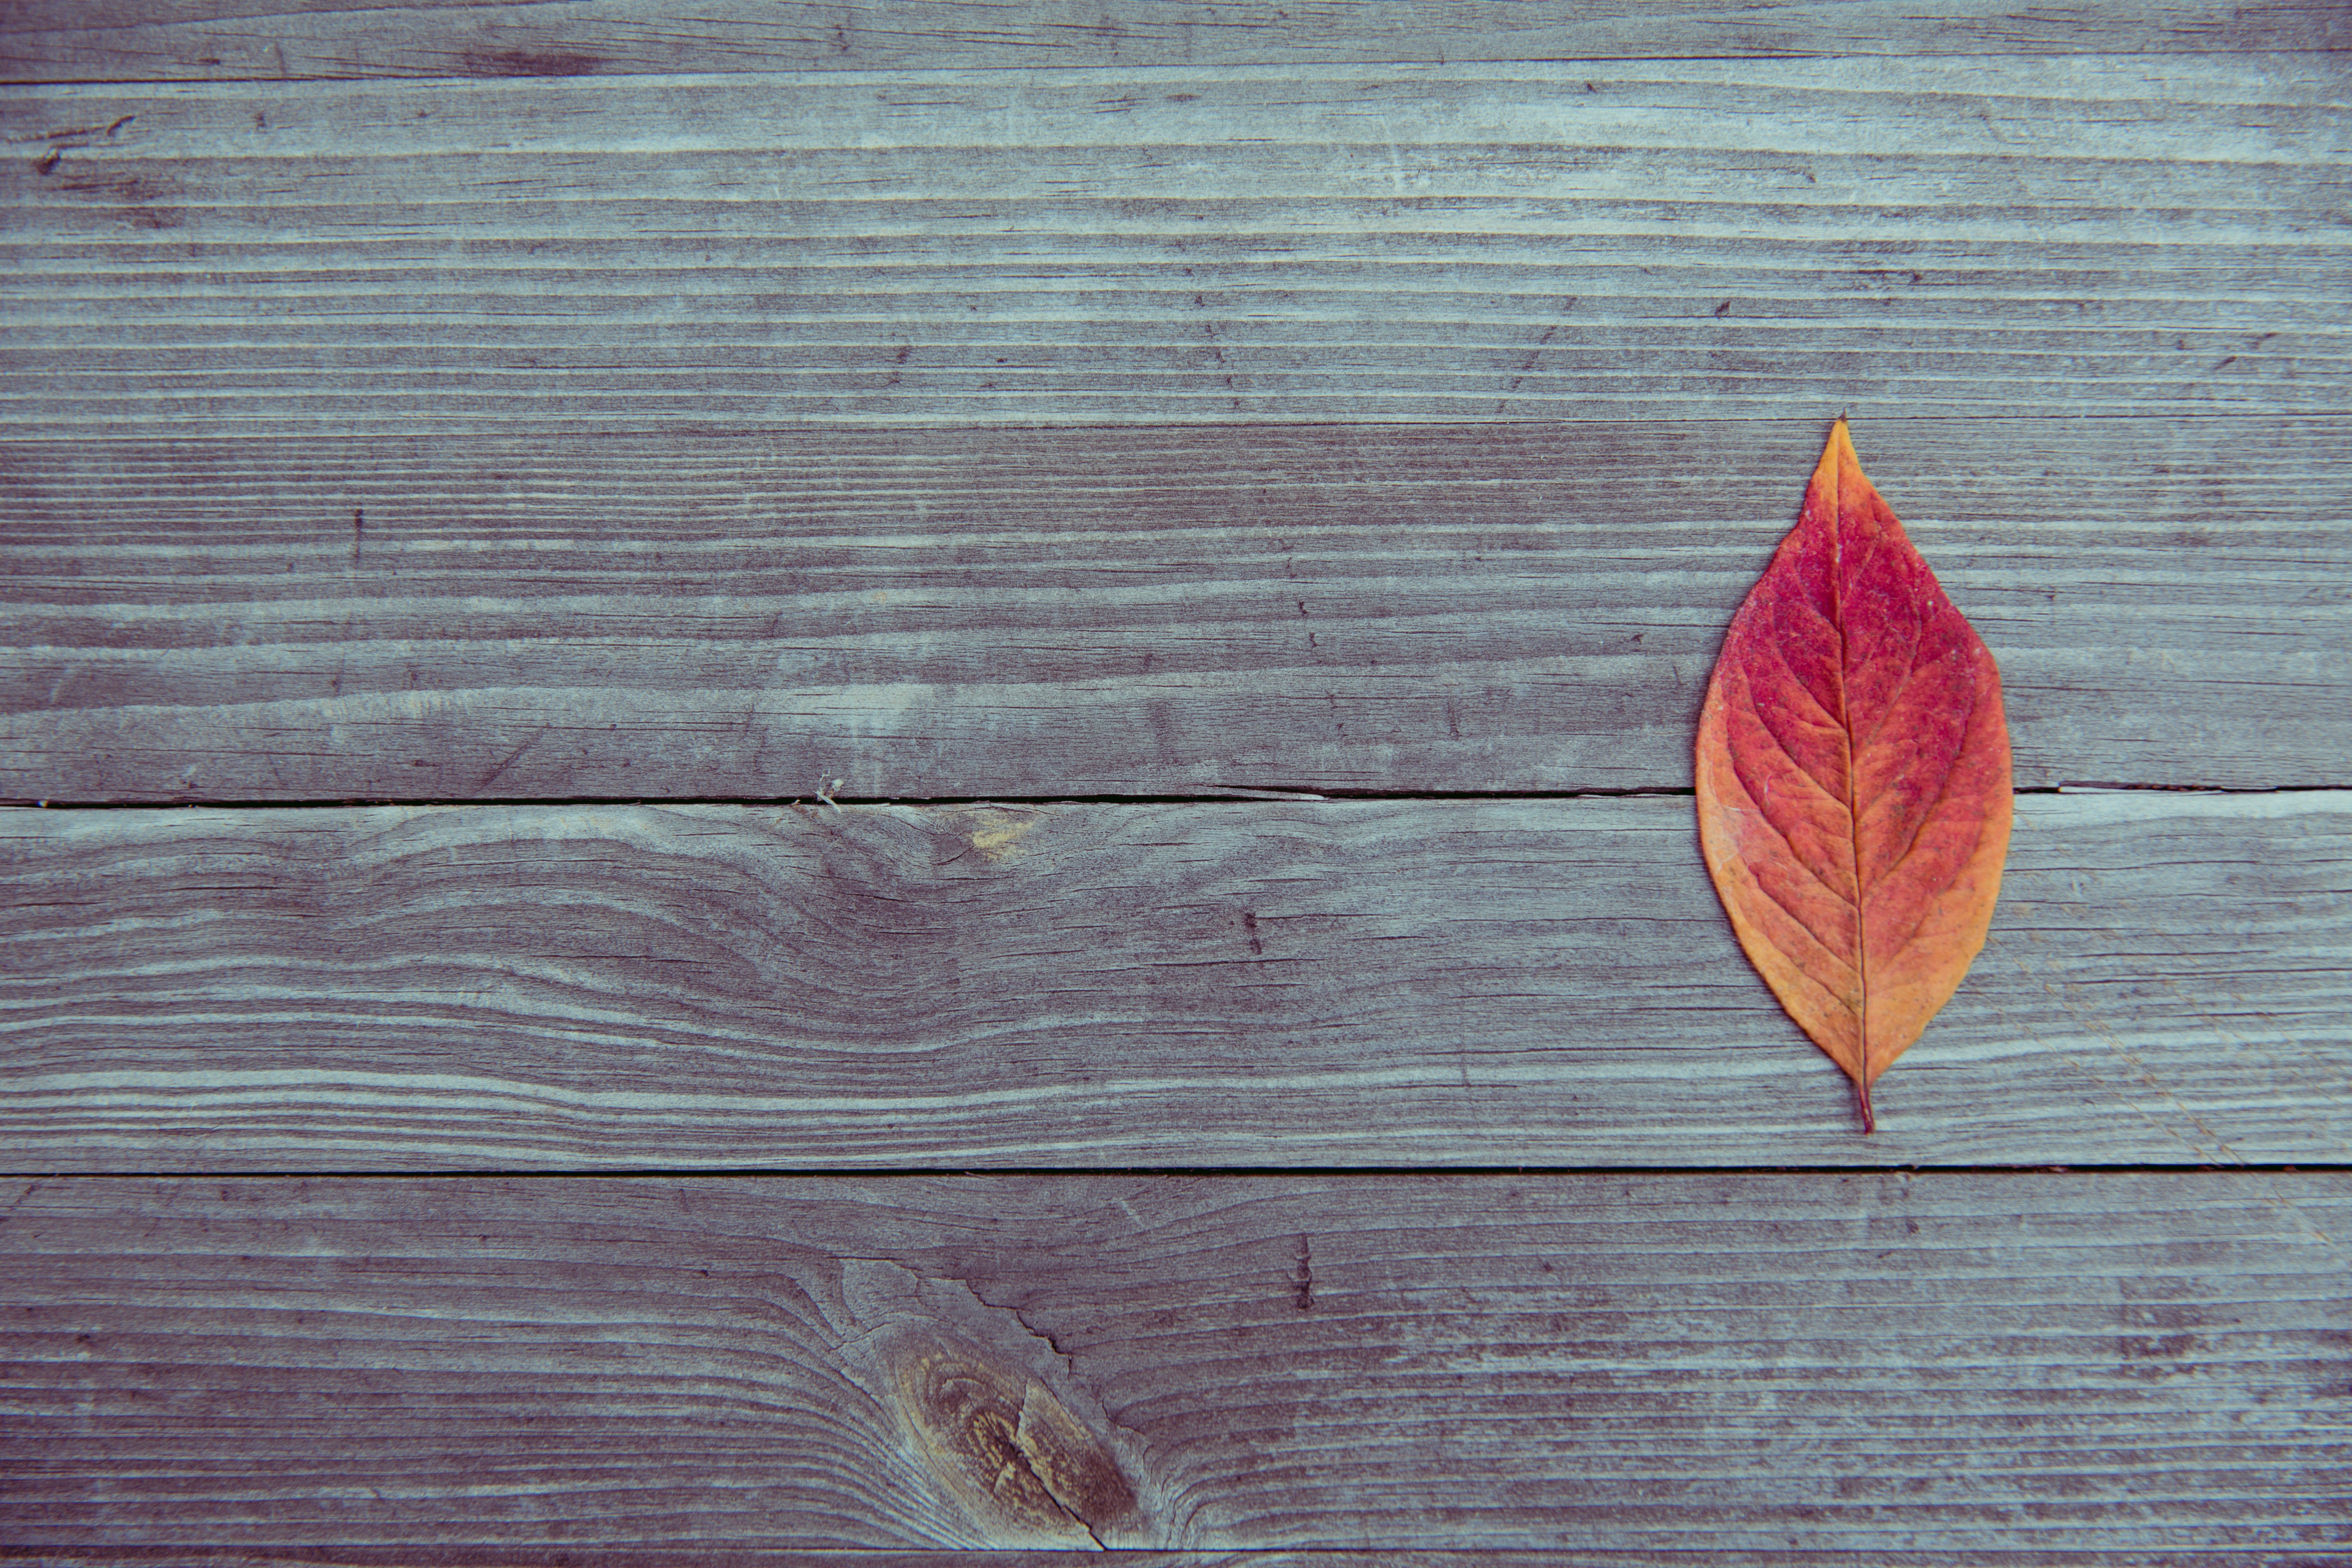 Orange and red leaf in brown wood plank photo